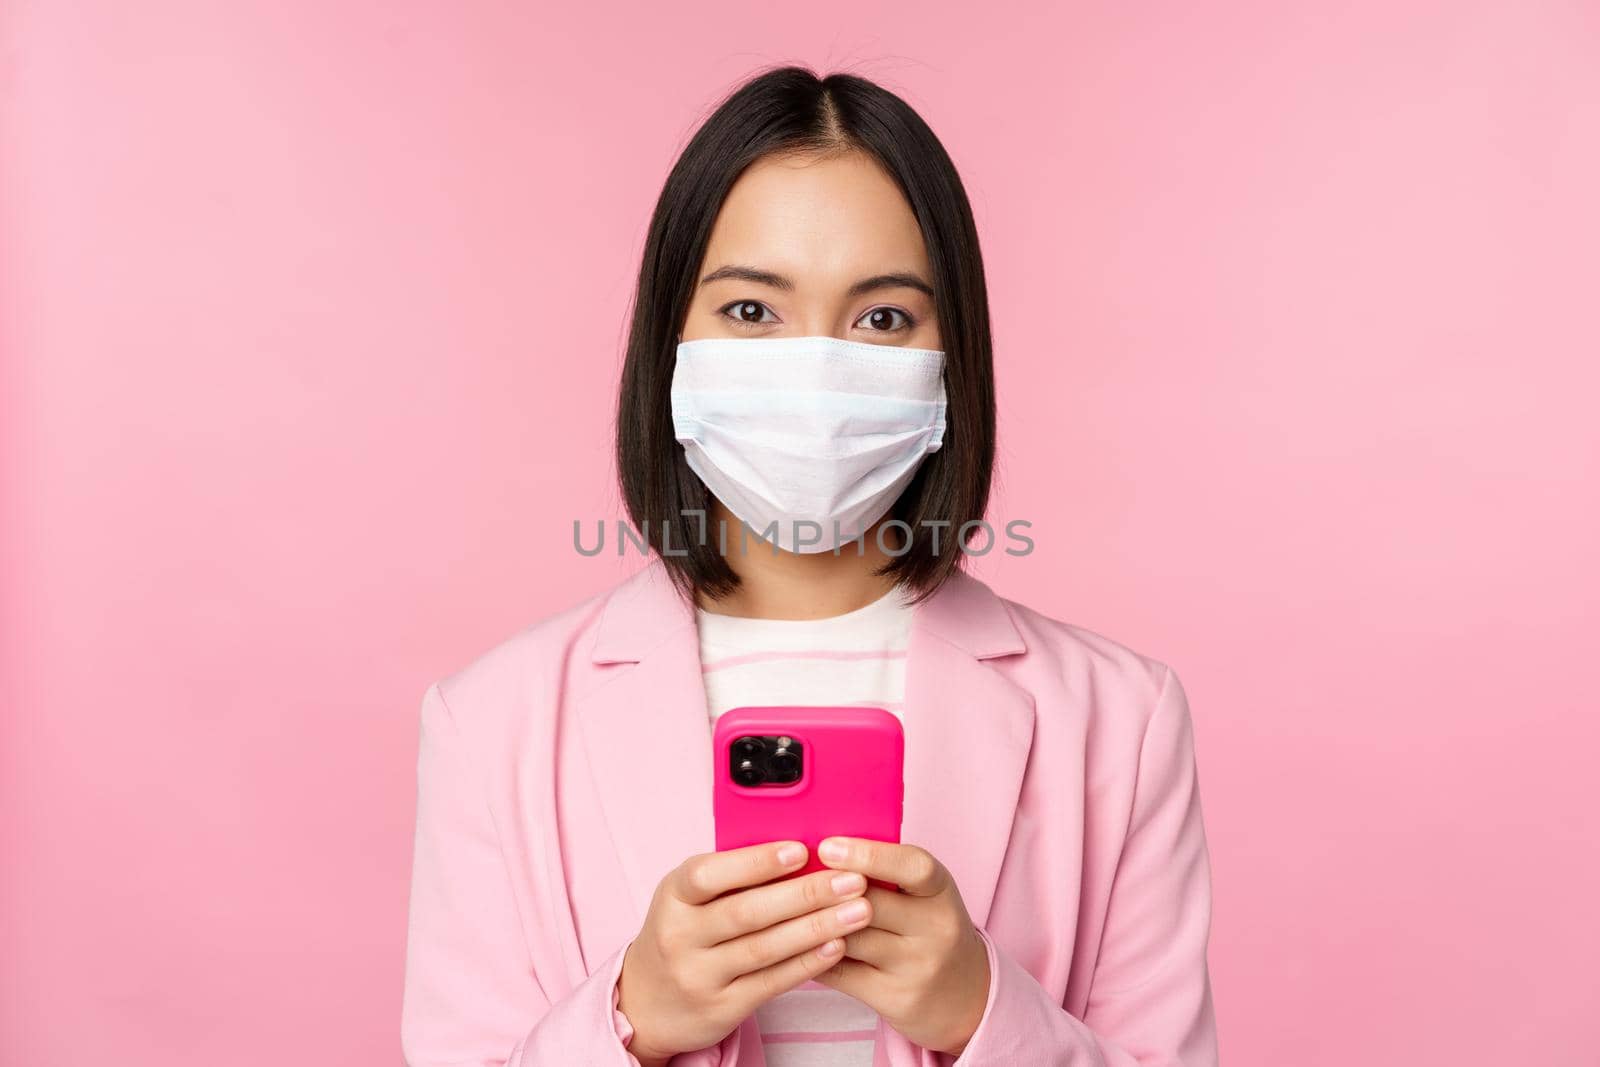 Business people and covid-19 concept. Japanese corporate office lady in suit and medical face mask, using mobile phone and smiling at camera, pink background.